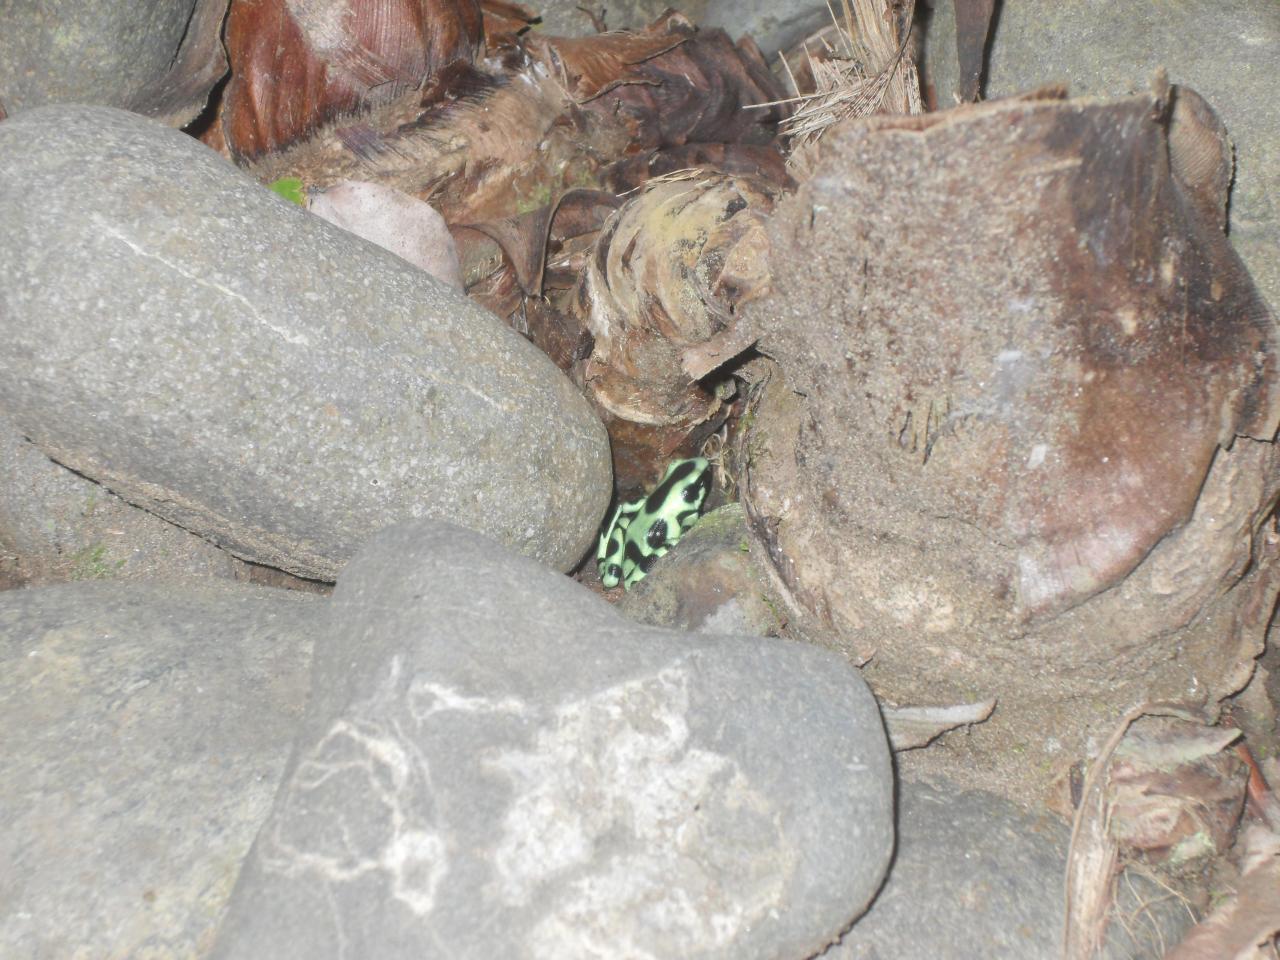 Black and green poison dart frog